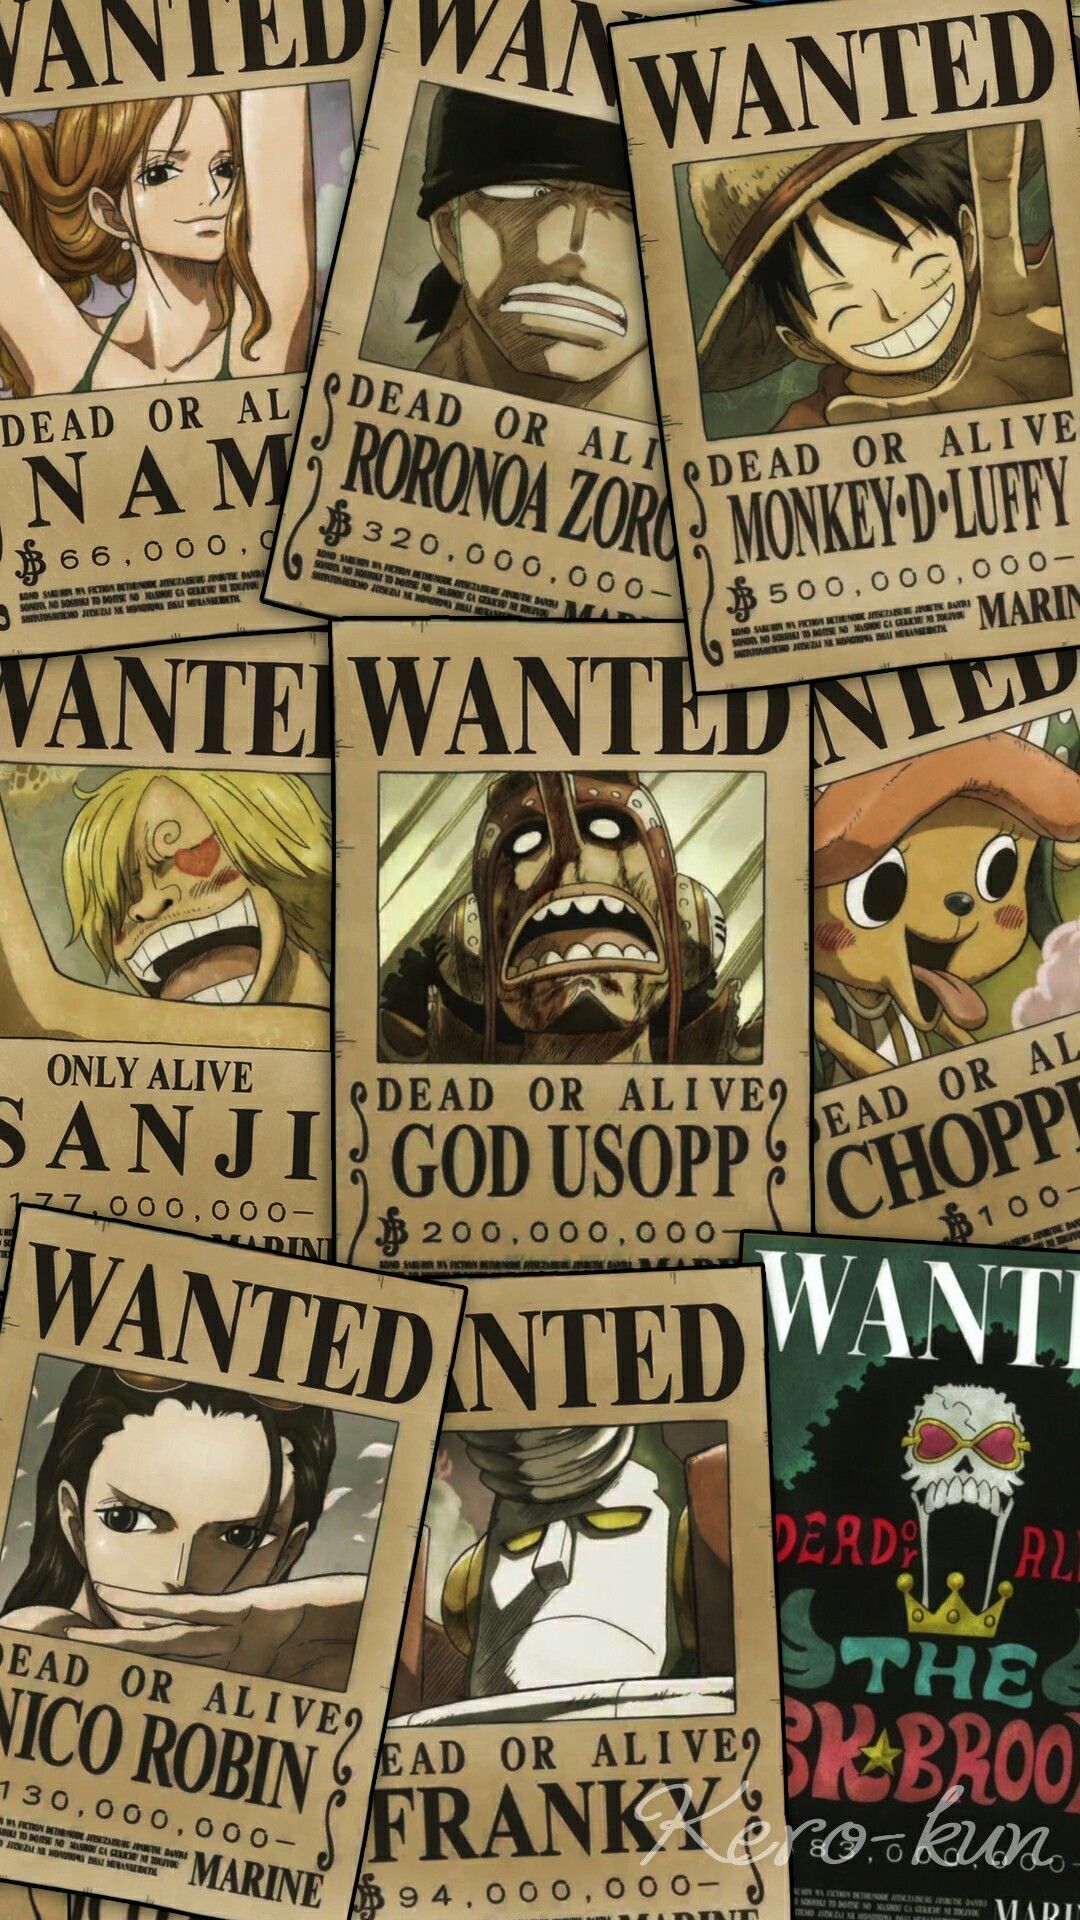 One Piece Bounty Rush 4K Wallpaper (12 variations on ) free